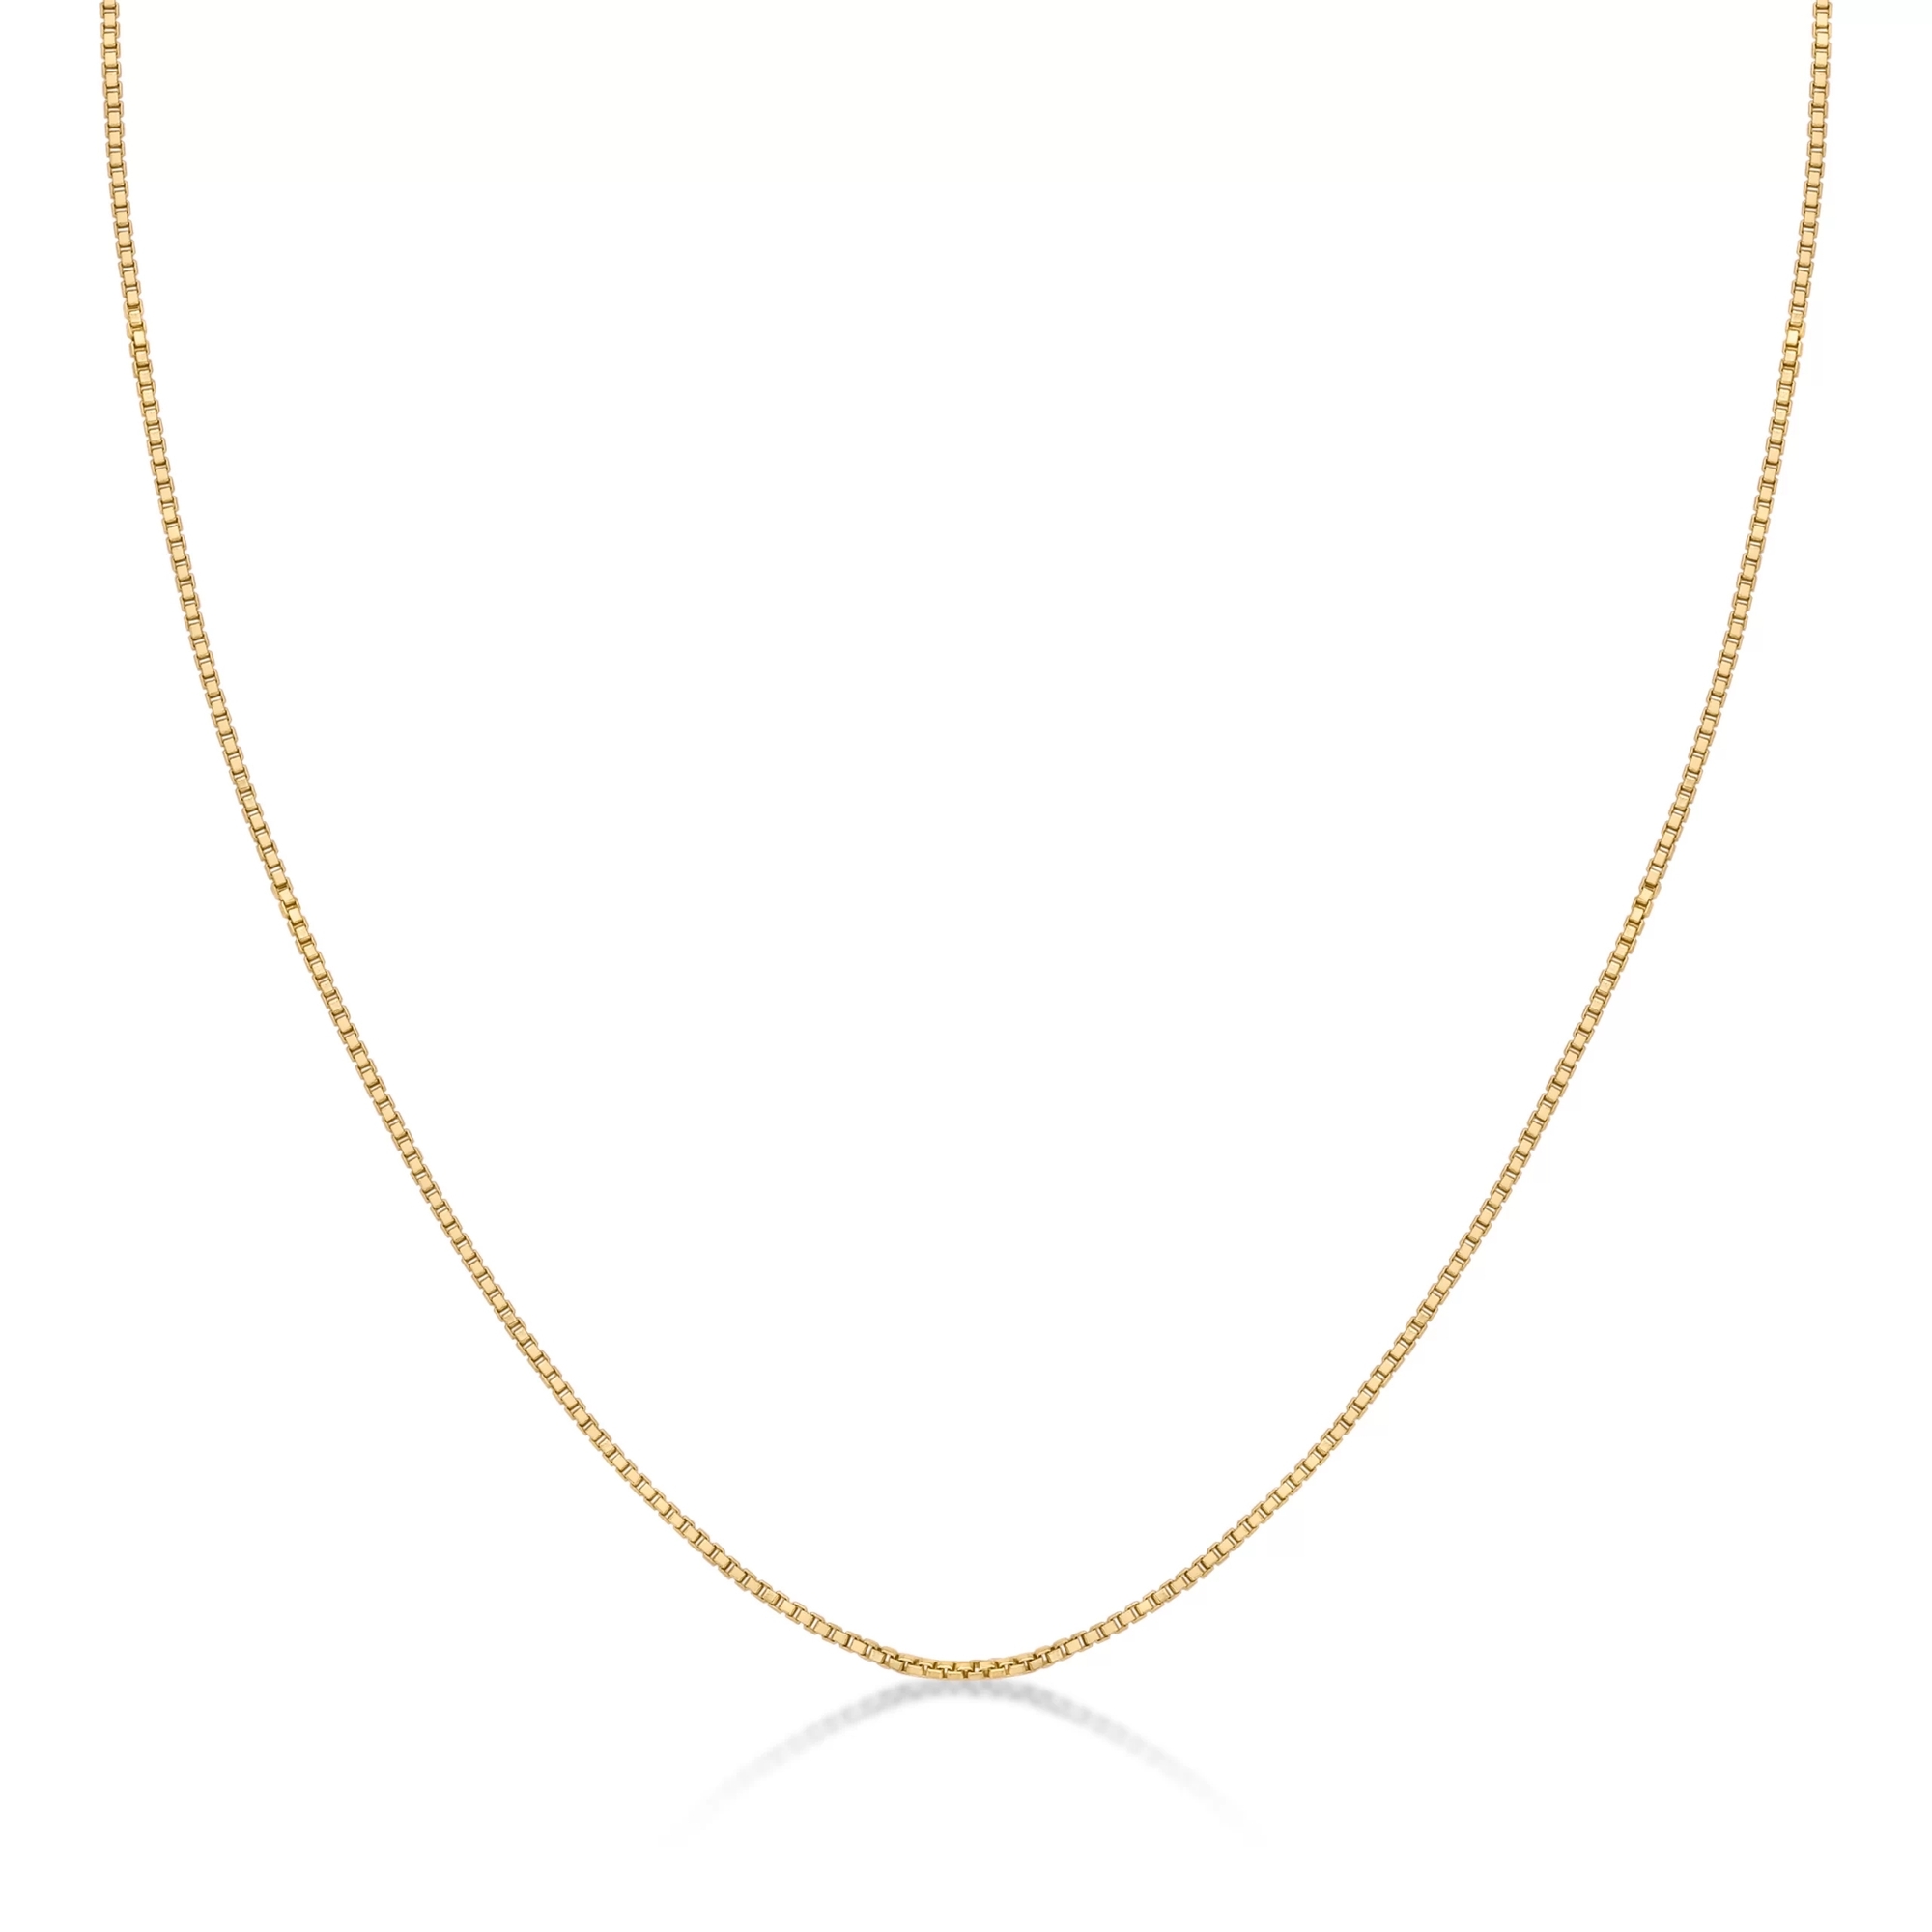 Women's Replacement Chain with Spring Ring Clasp, 14K Yellow Gold, 0.6 MM Box Chain, 18 Inch  | Lavari Jewelers